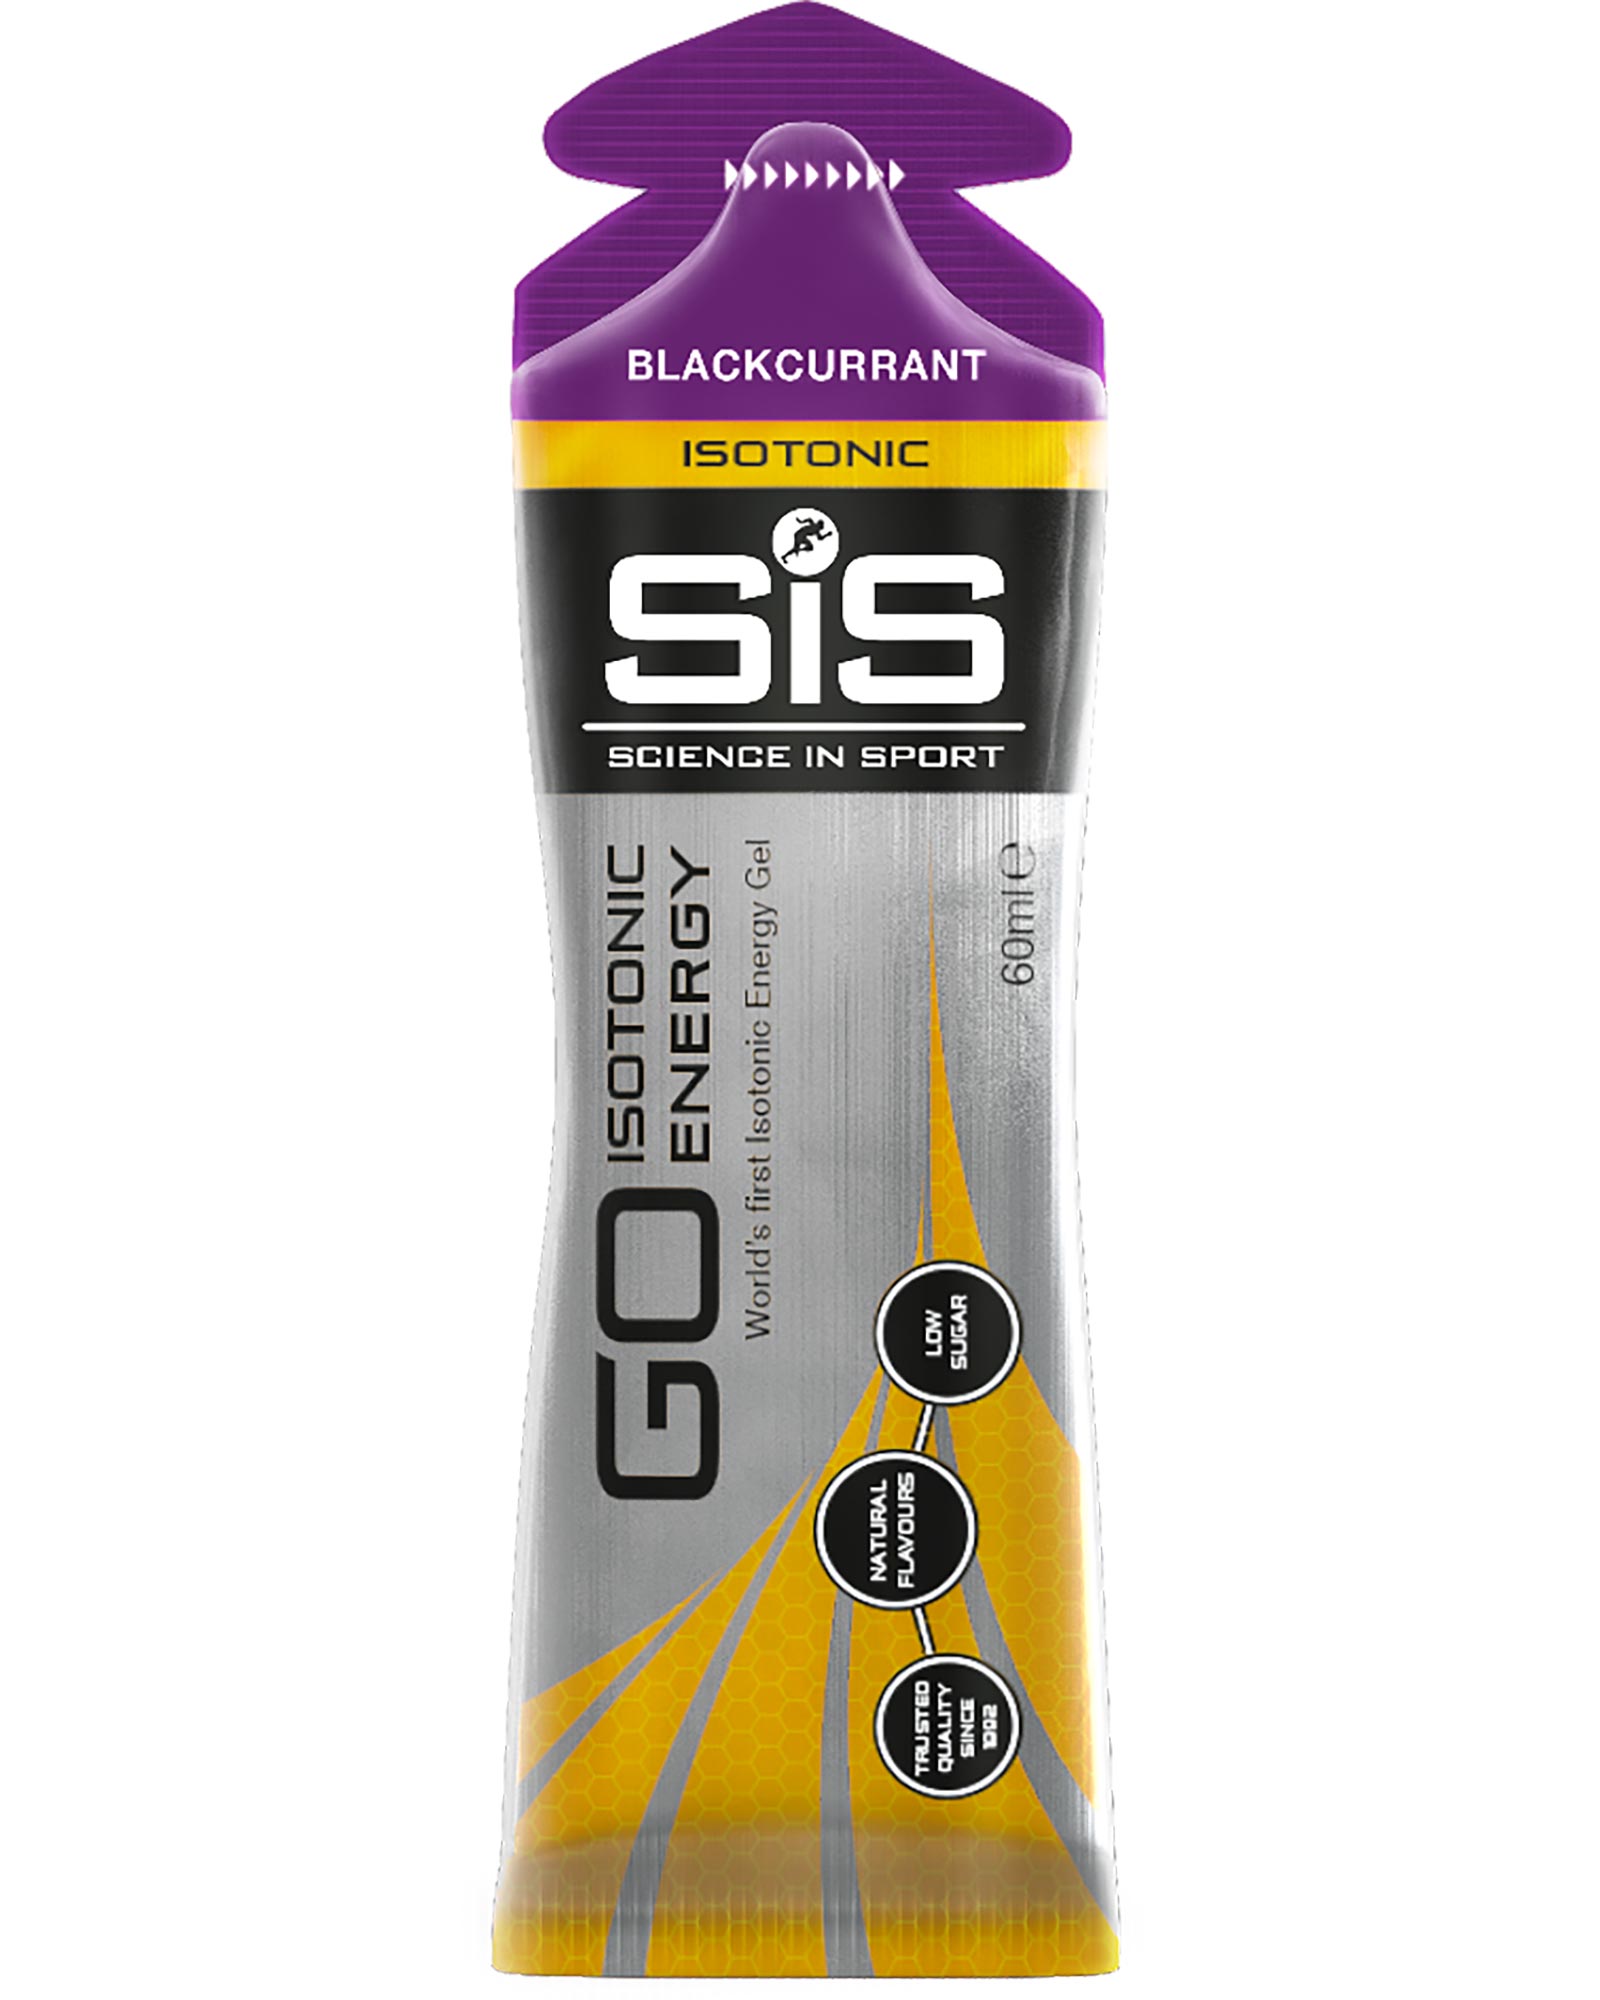 Science In Sport GO Gel Isotonic   Blackcurrant Sports Nutrition - Blackcurrant